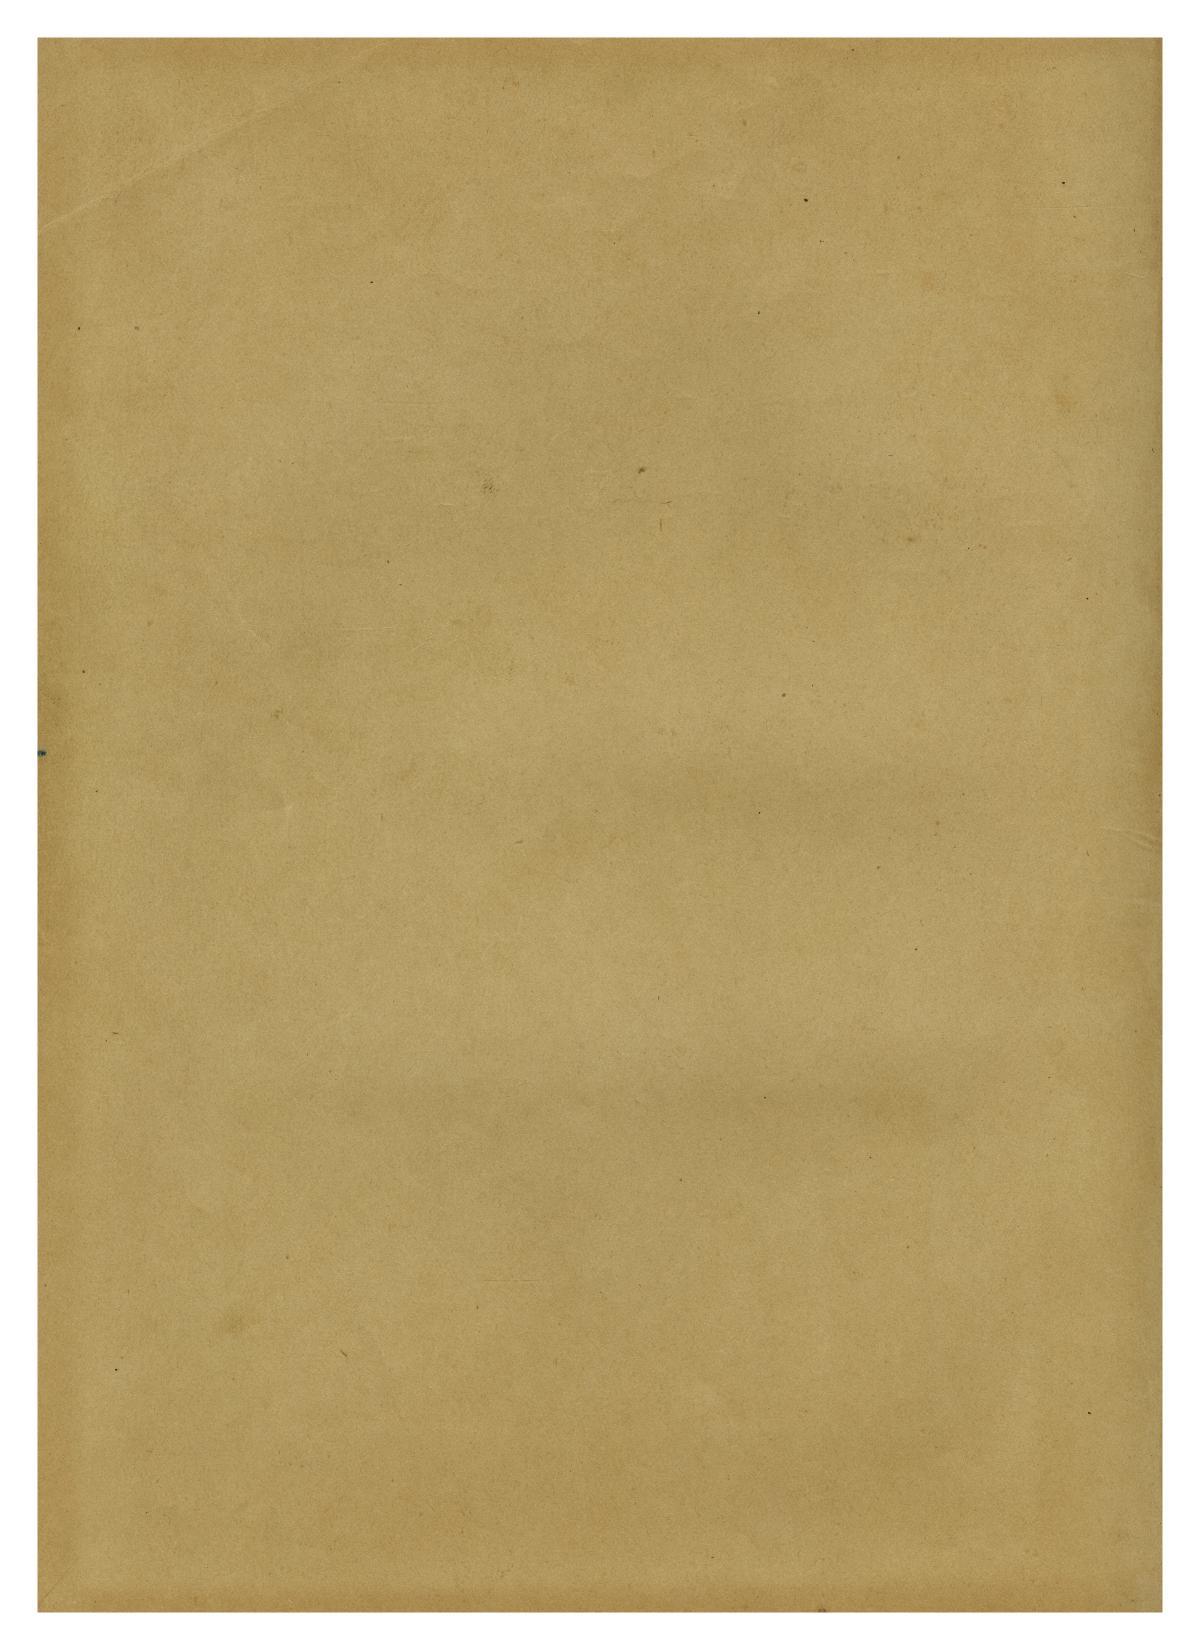 The Lasso, Yearbook of Howard Payne College, 1919
                                                
                                                    Front Inside
                                                